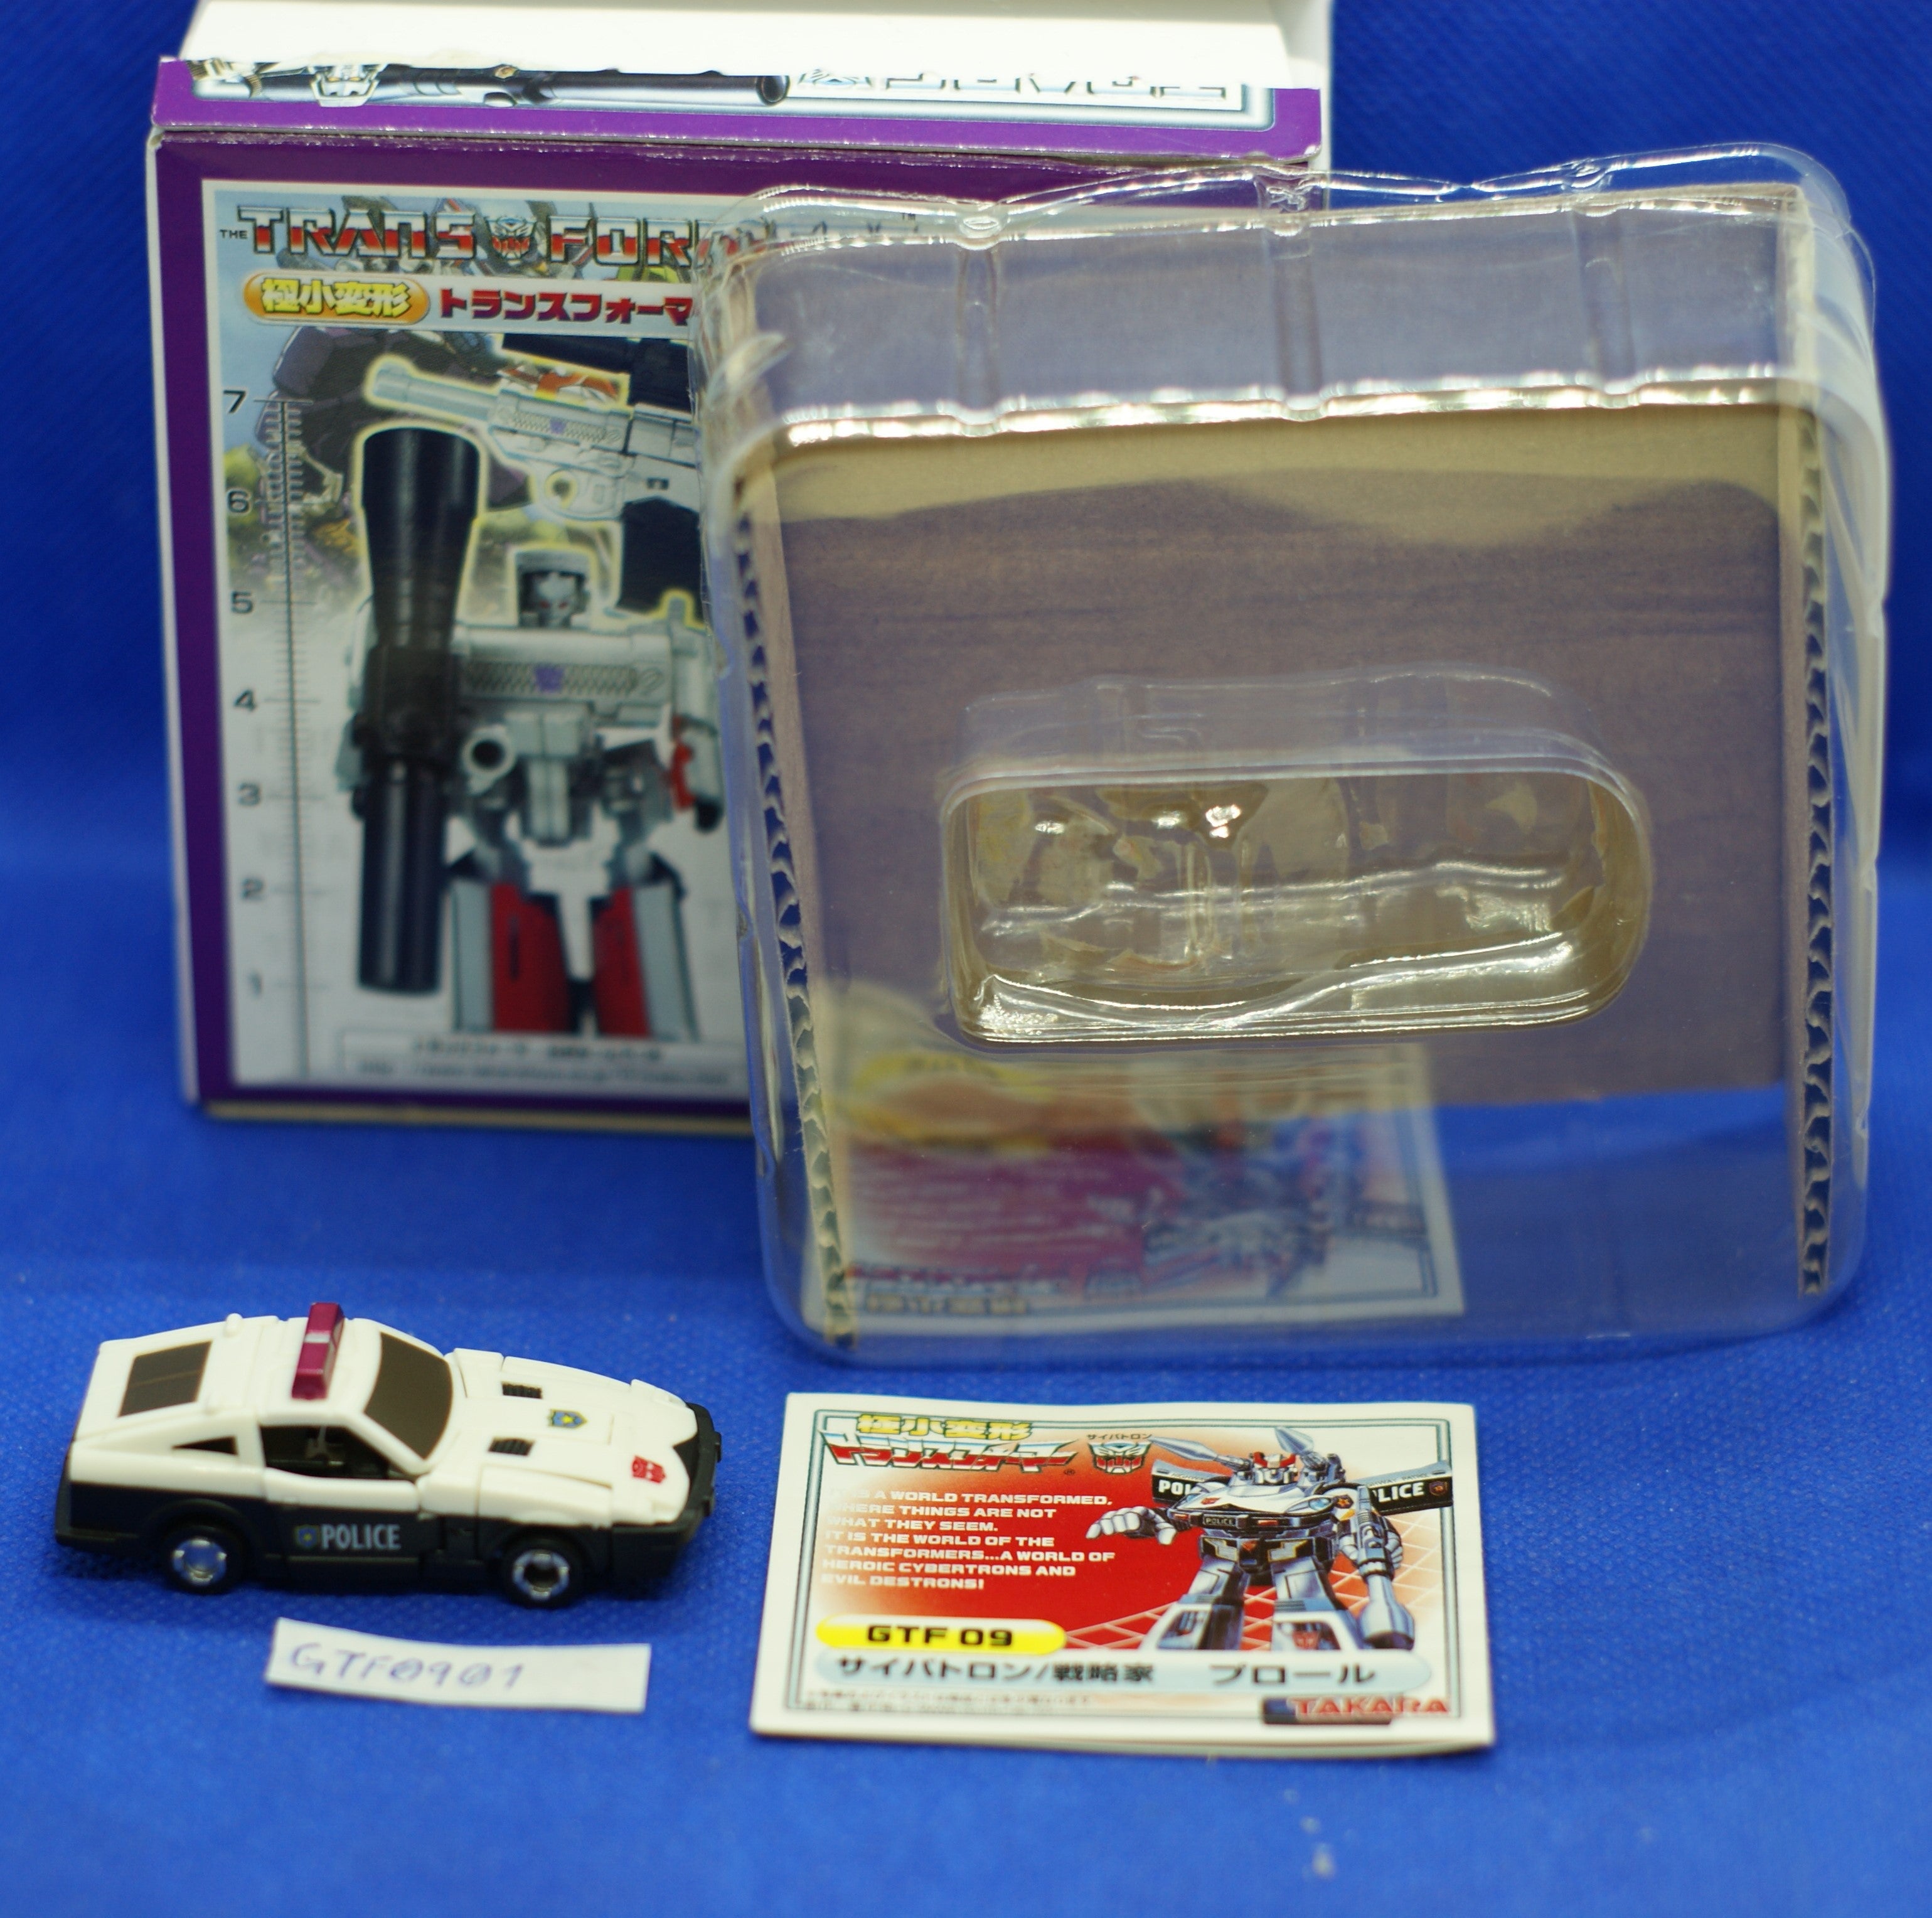 Transformers - Autobot: Prowl (WST) (GTF0901) | All Aboard Games